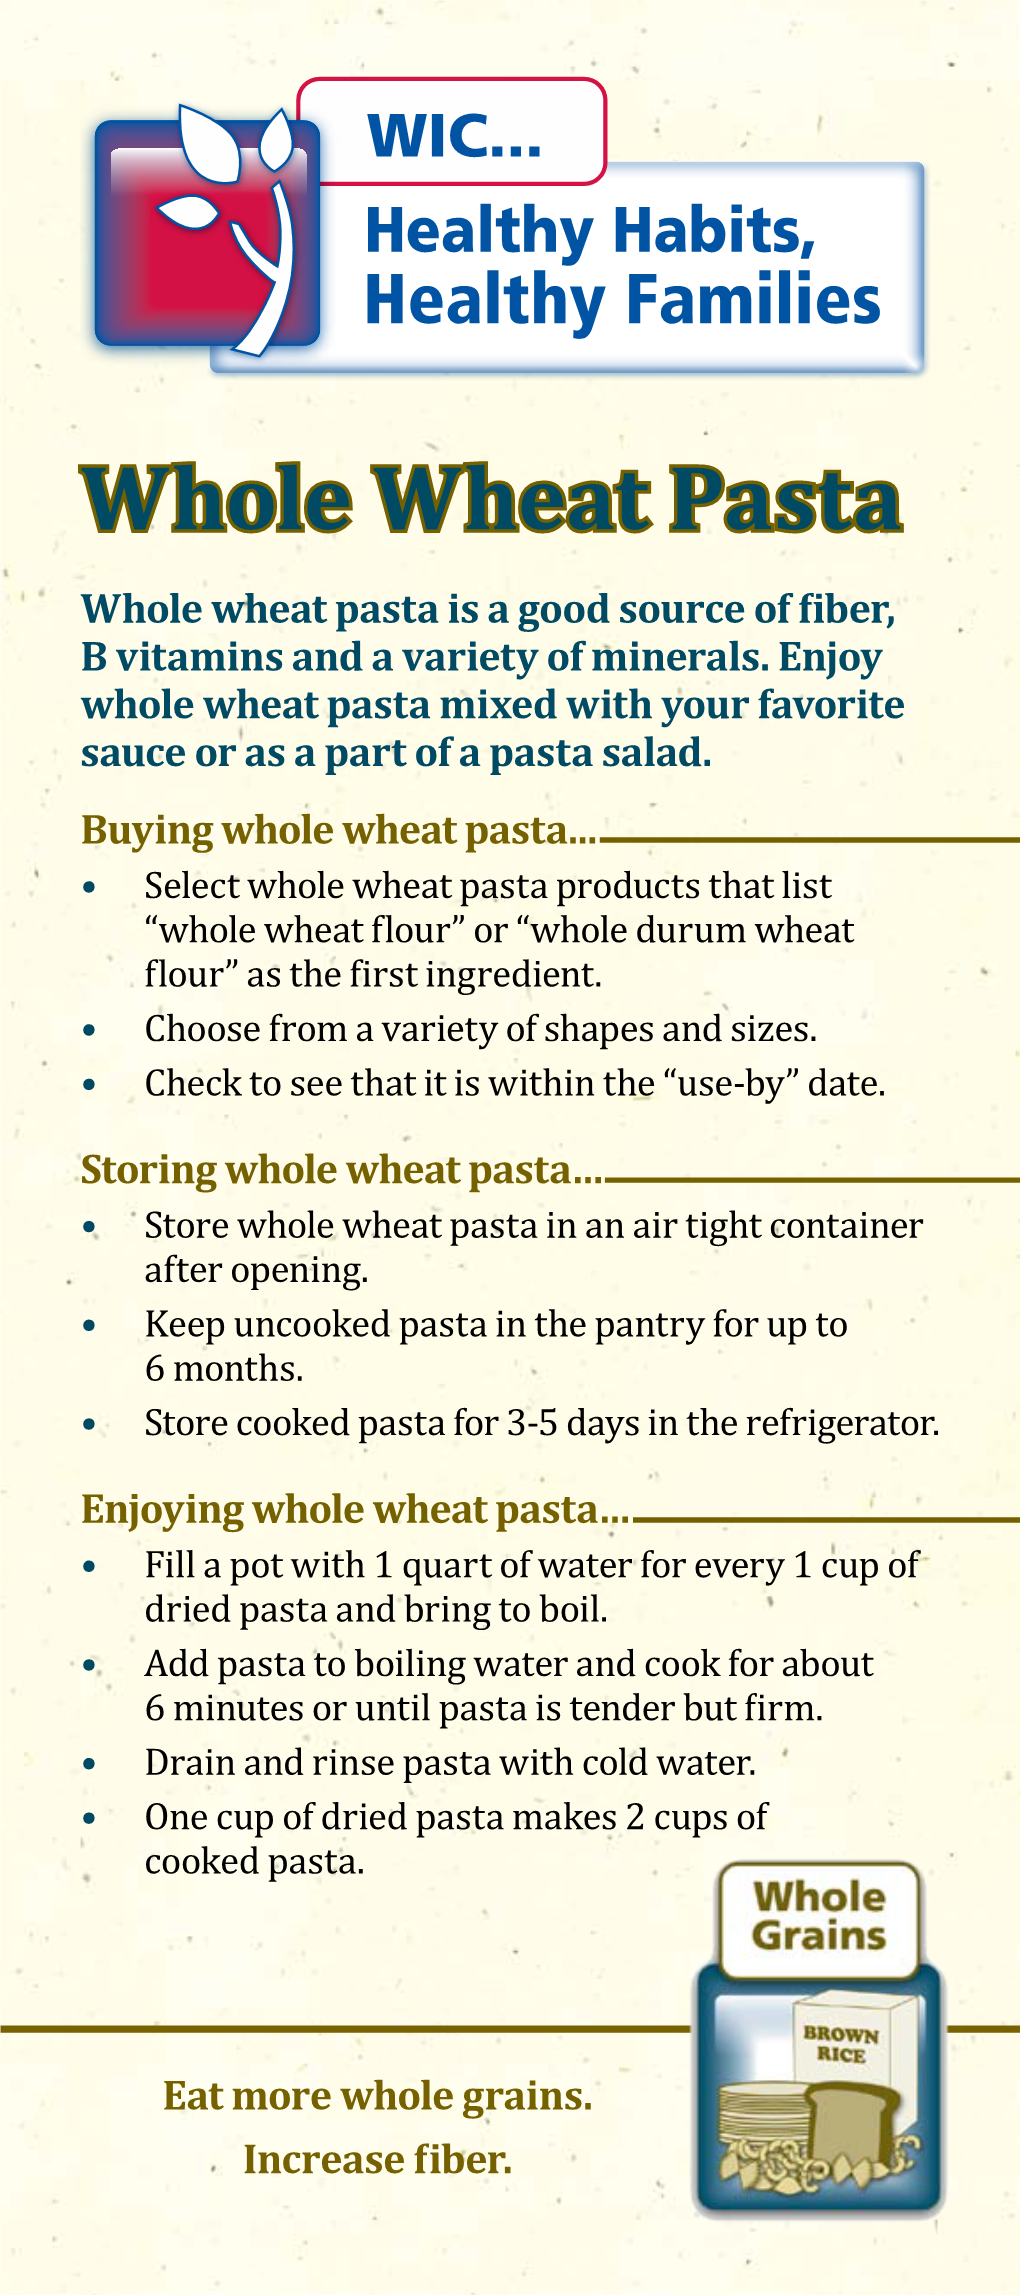 Whole Wheat Pasta Whole Wheat Pasta Is a Good Source of Fiber, B Vitamins and a Variety of Minerals